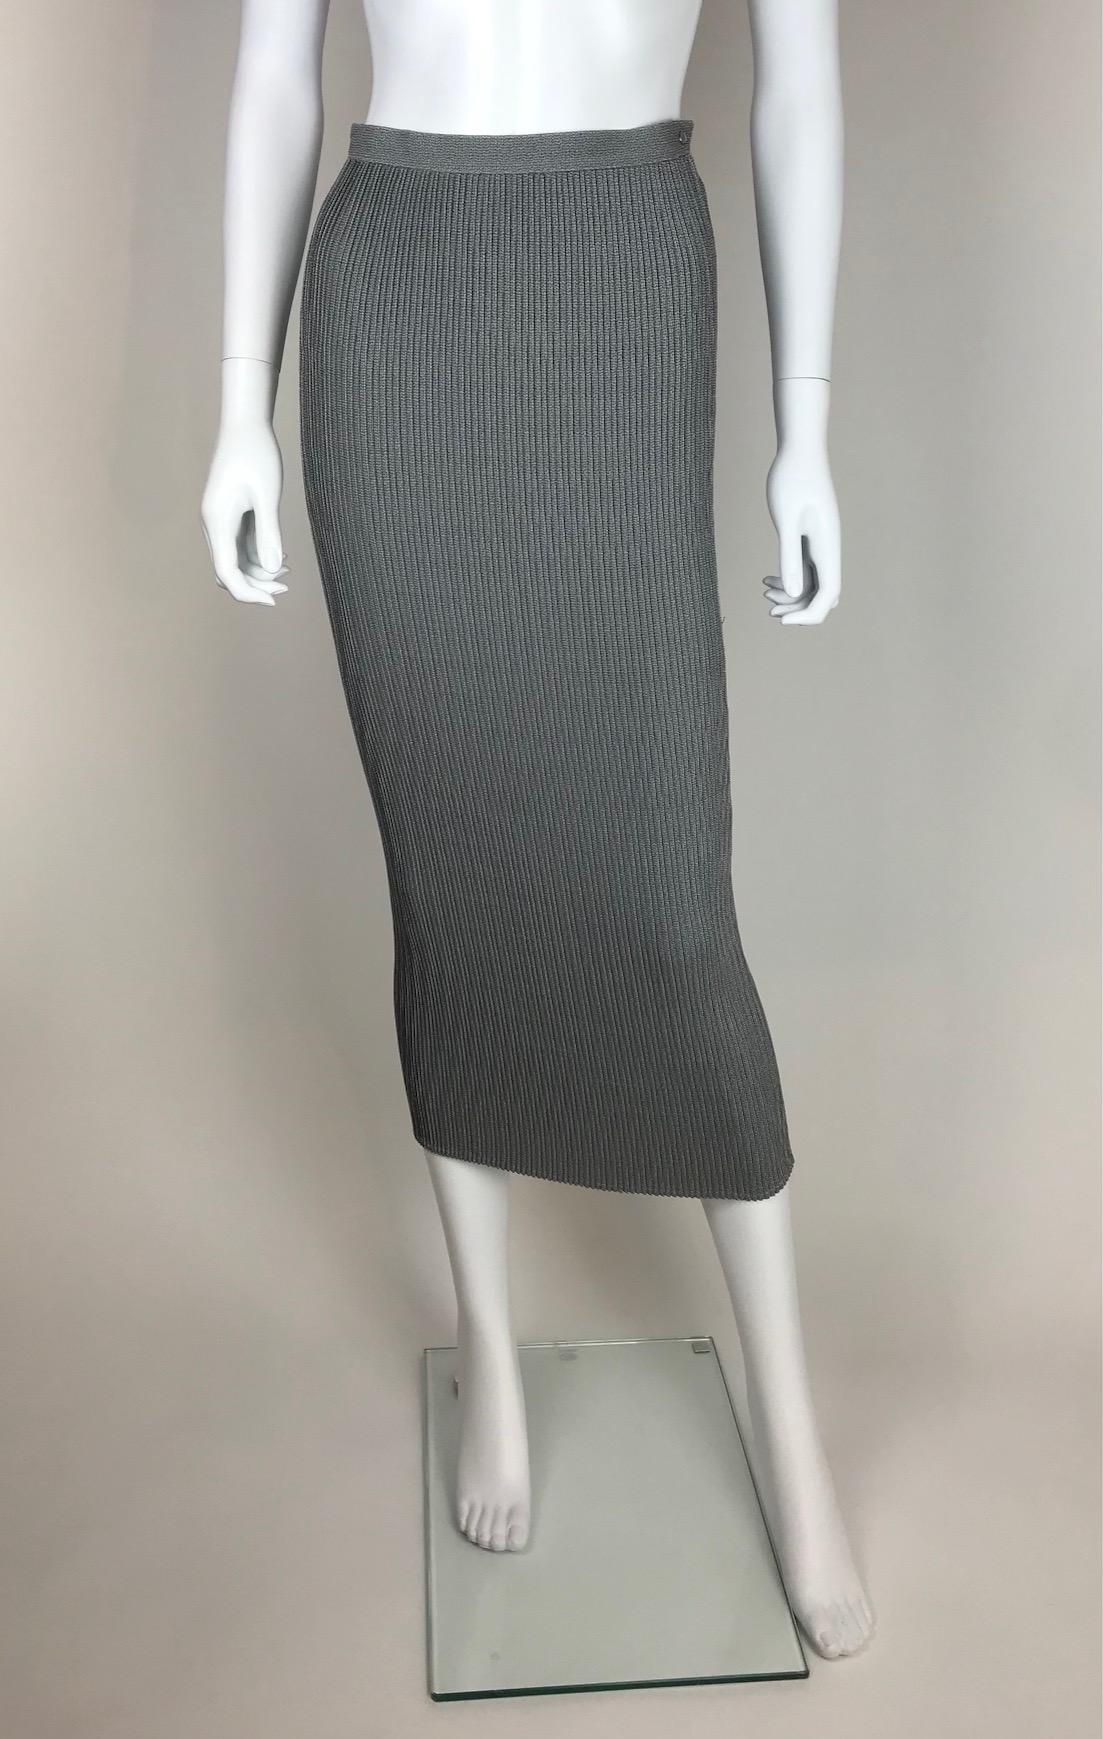 THIERRY MUGLER, Made in France, circa 90. 
Mottled grey pleated skirt. No lining. No size tag. I would recommend it for 34/36 EU. 
Please see measurements bellow, taken flat and unstretched : 
Waist width 32cm / Length 85cm. 

Every item is rare and